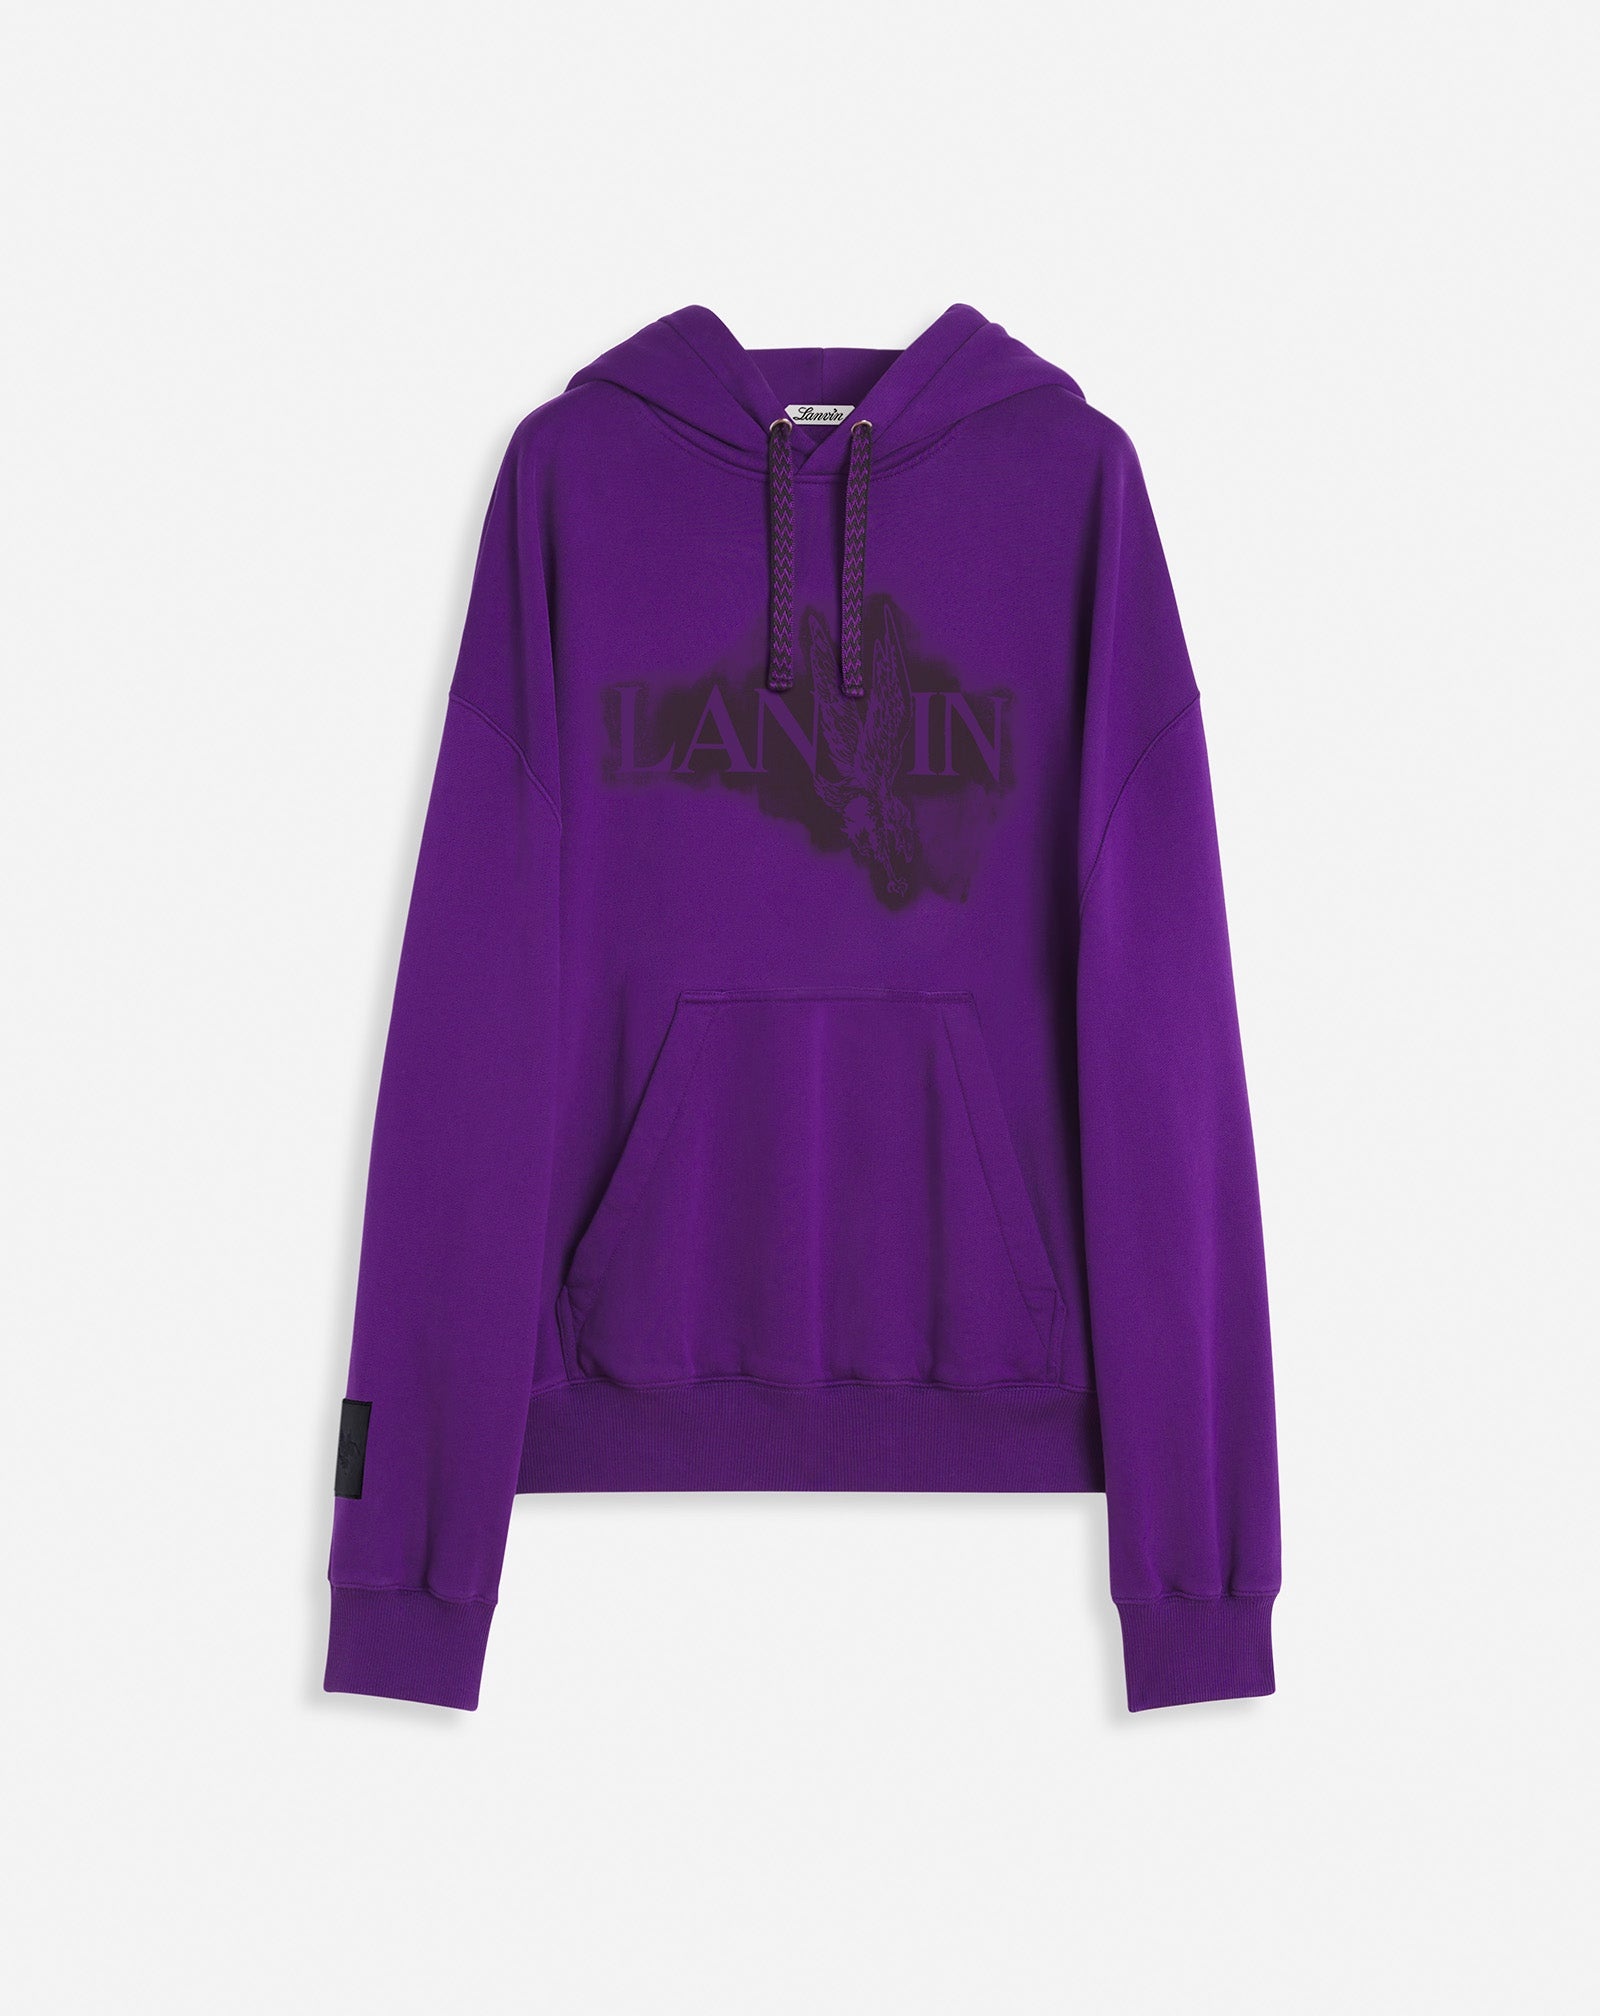 LANVIN X FUTURE UNISEX BAGGY HOODIE WITH EAGLE PRINT - 1